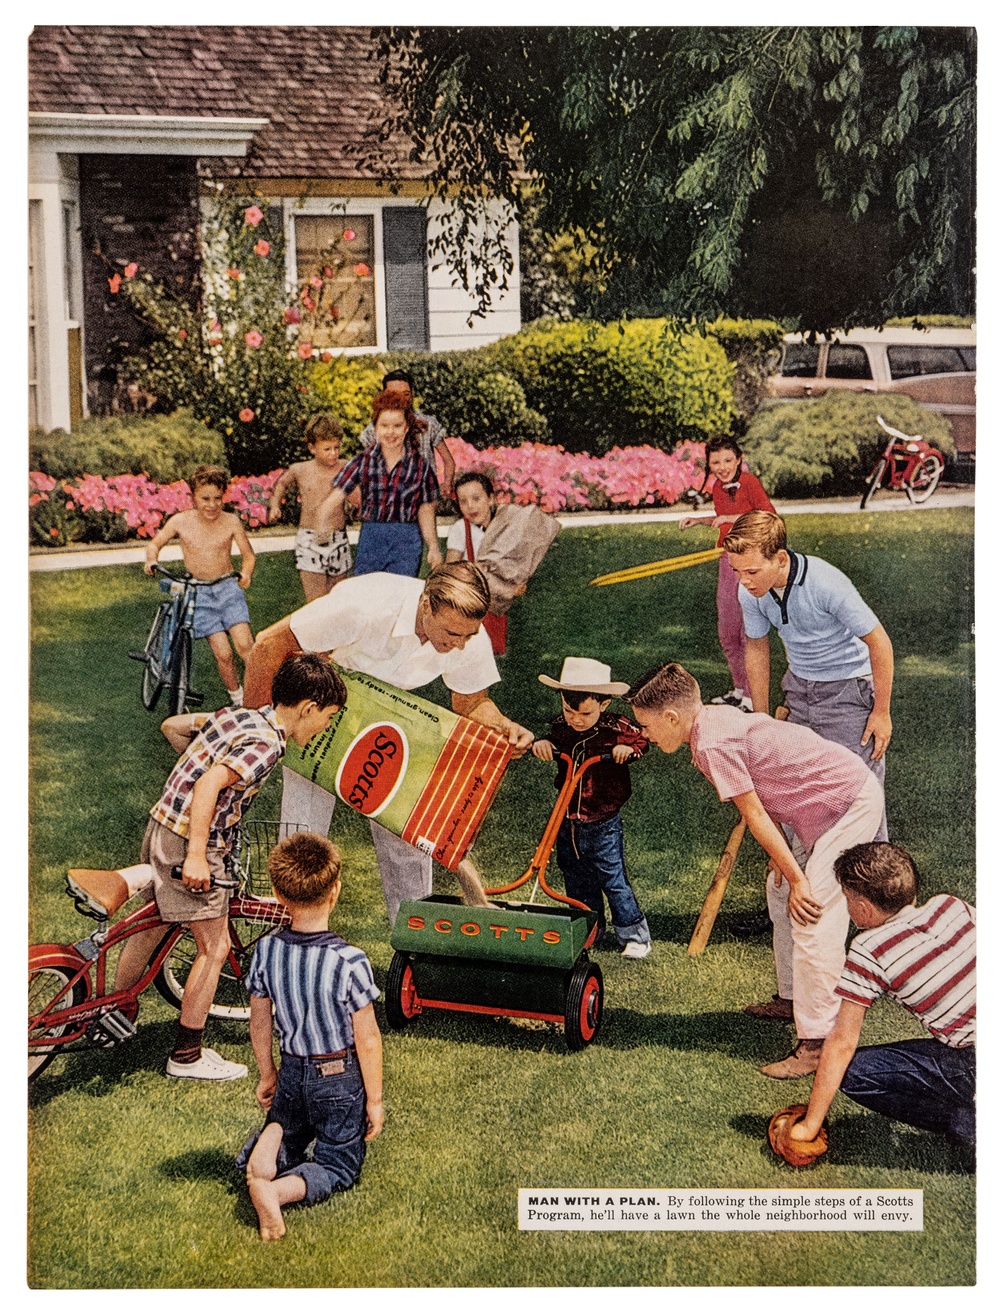 Advertisement of O.M. Scotts & Sons about lawn care, in: Life Magazine, 31 August 1959 © Vitra Design Museum